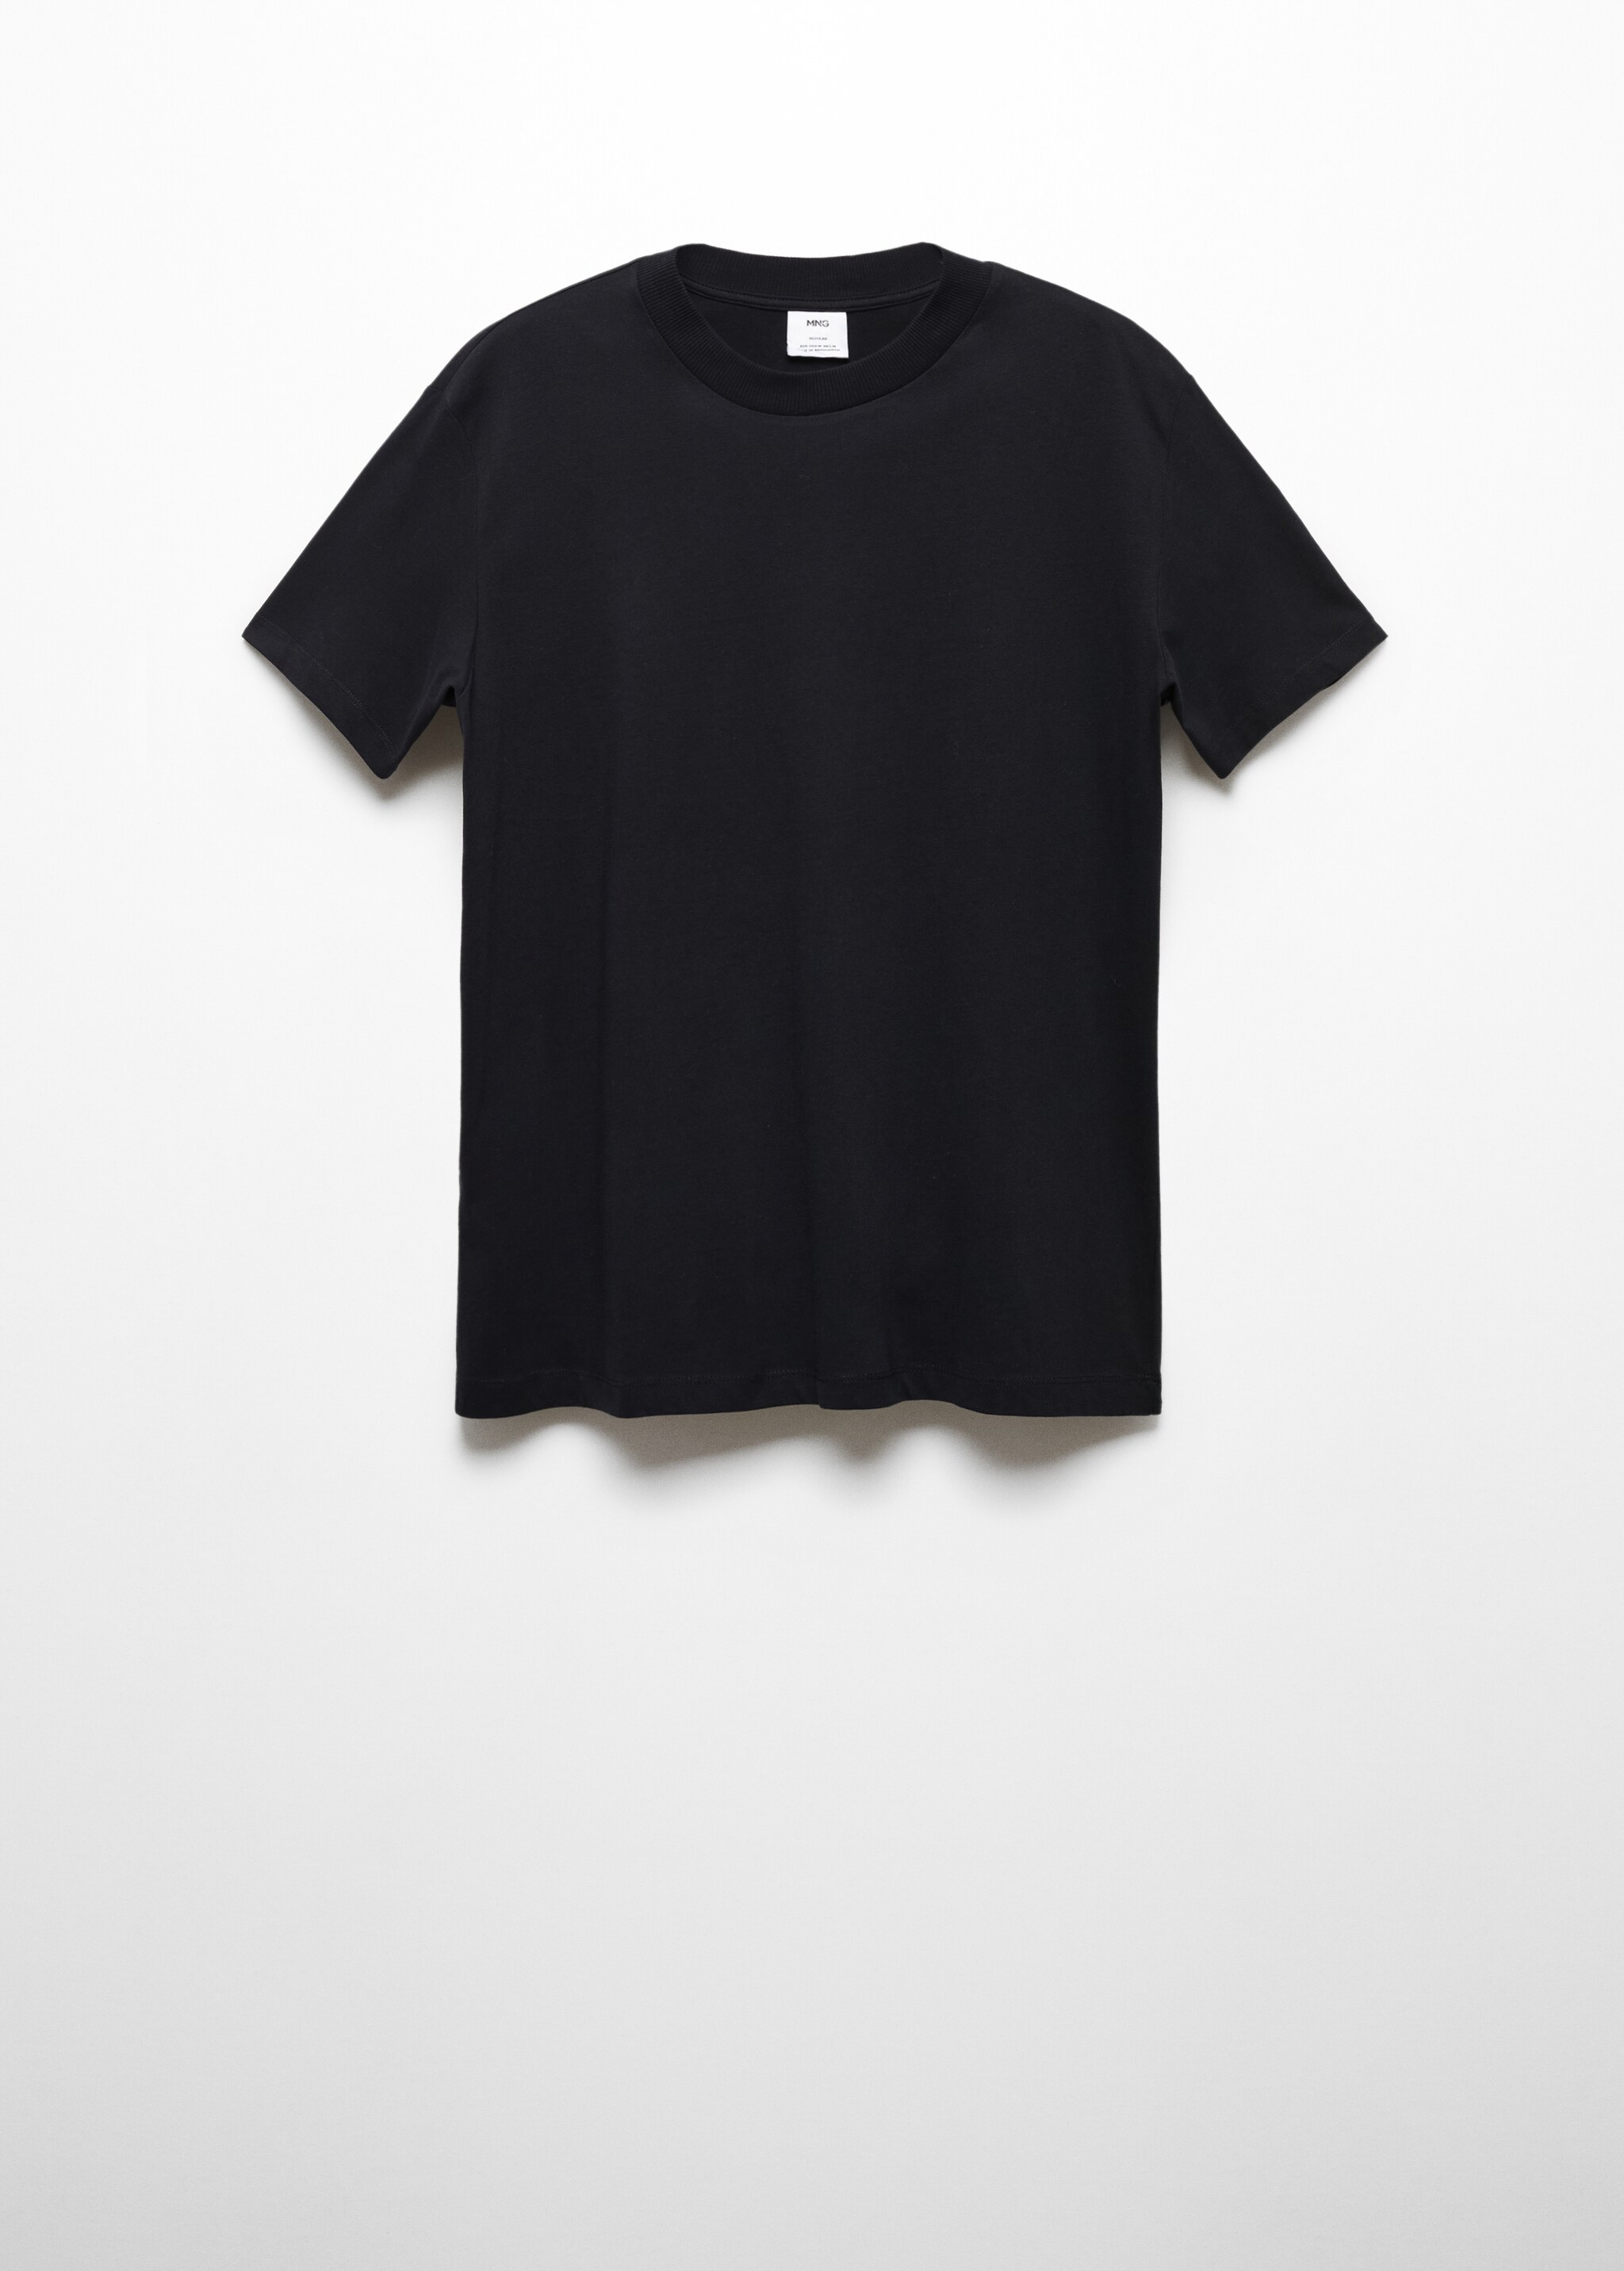 Basic 100% cotton t-shirt - Article without model